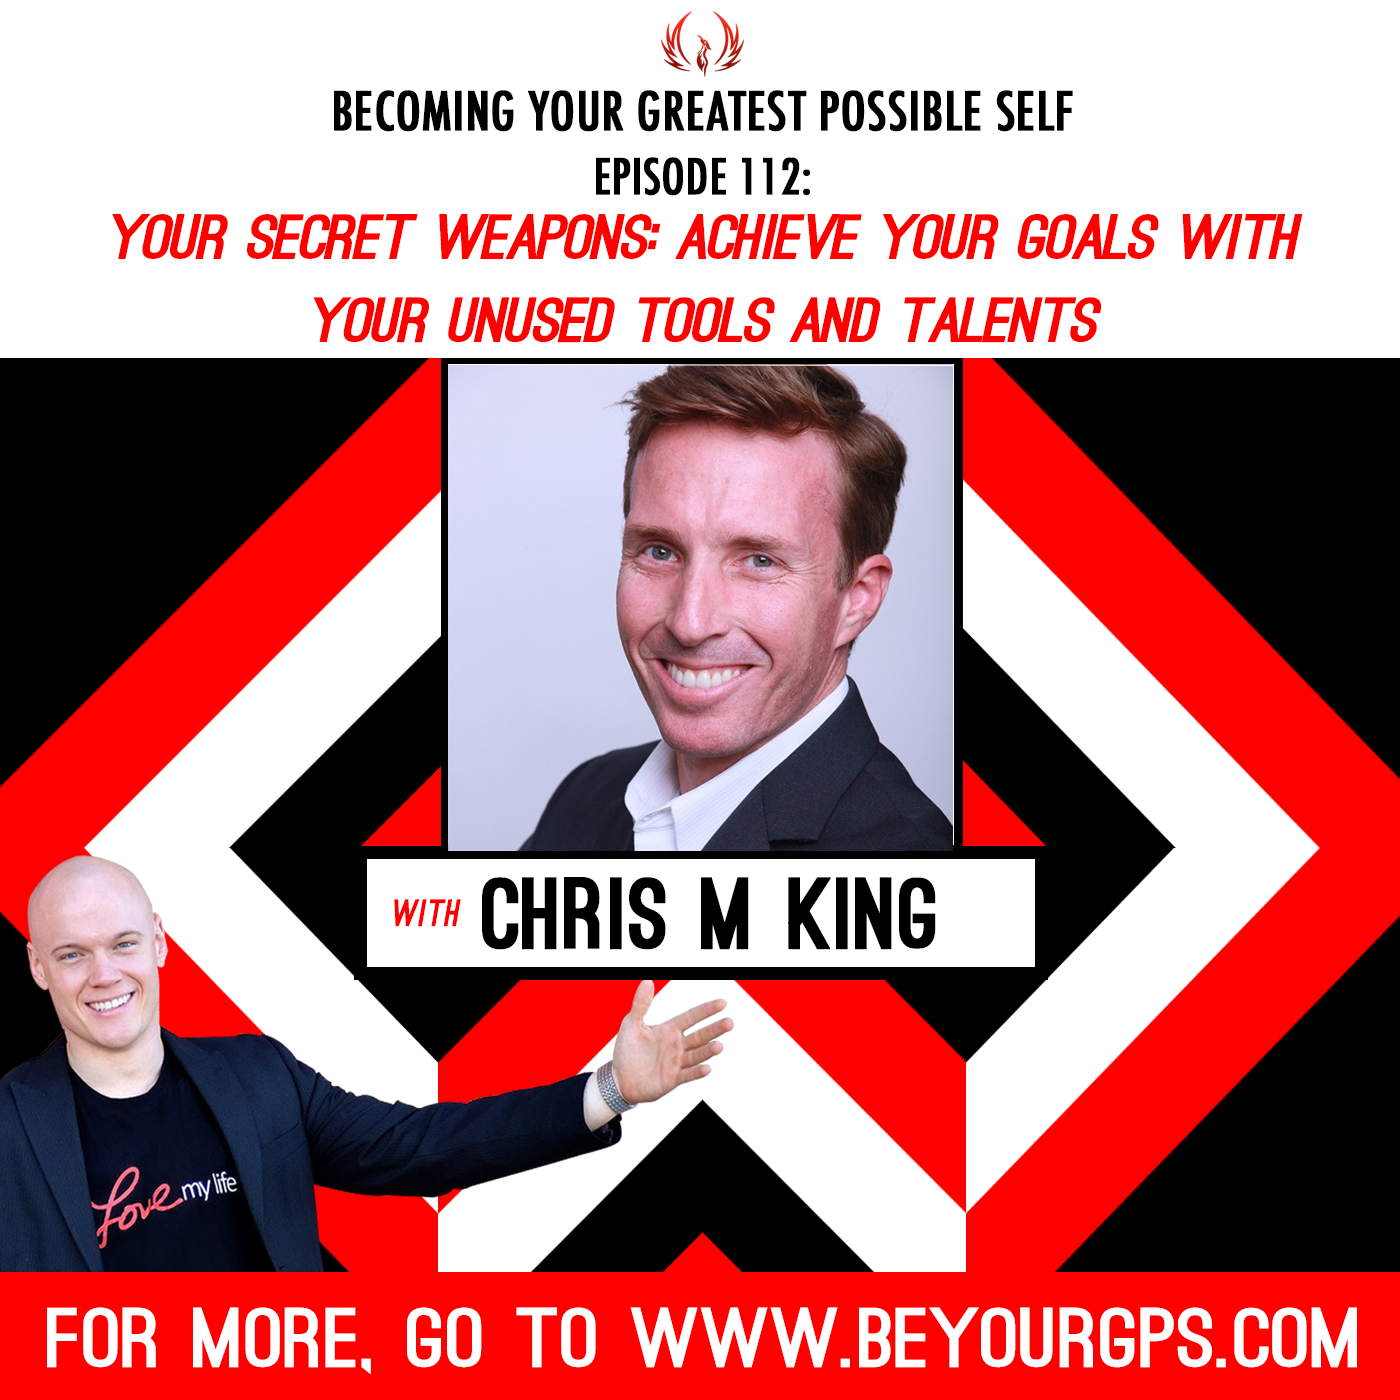 Your Secret Weapons - Achieve Your Goals with Your Unused Tools and Talents with Chris M. King